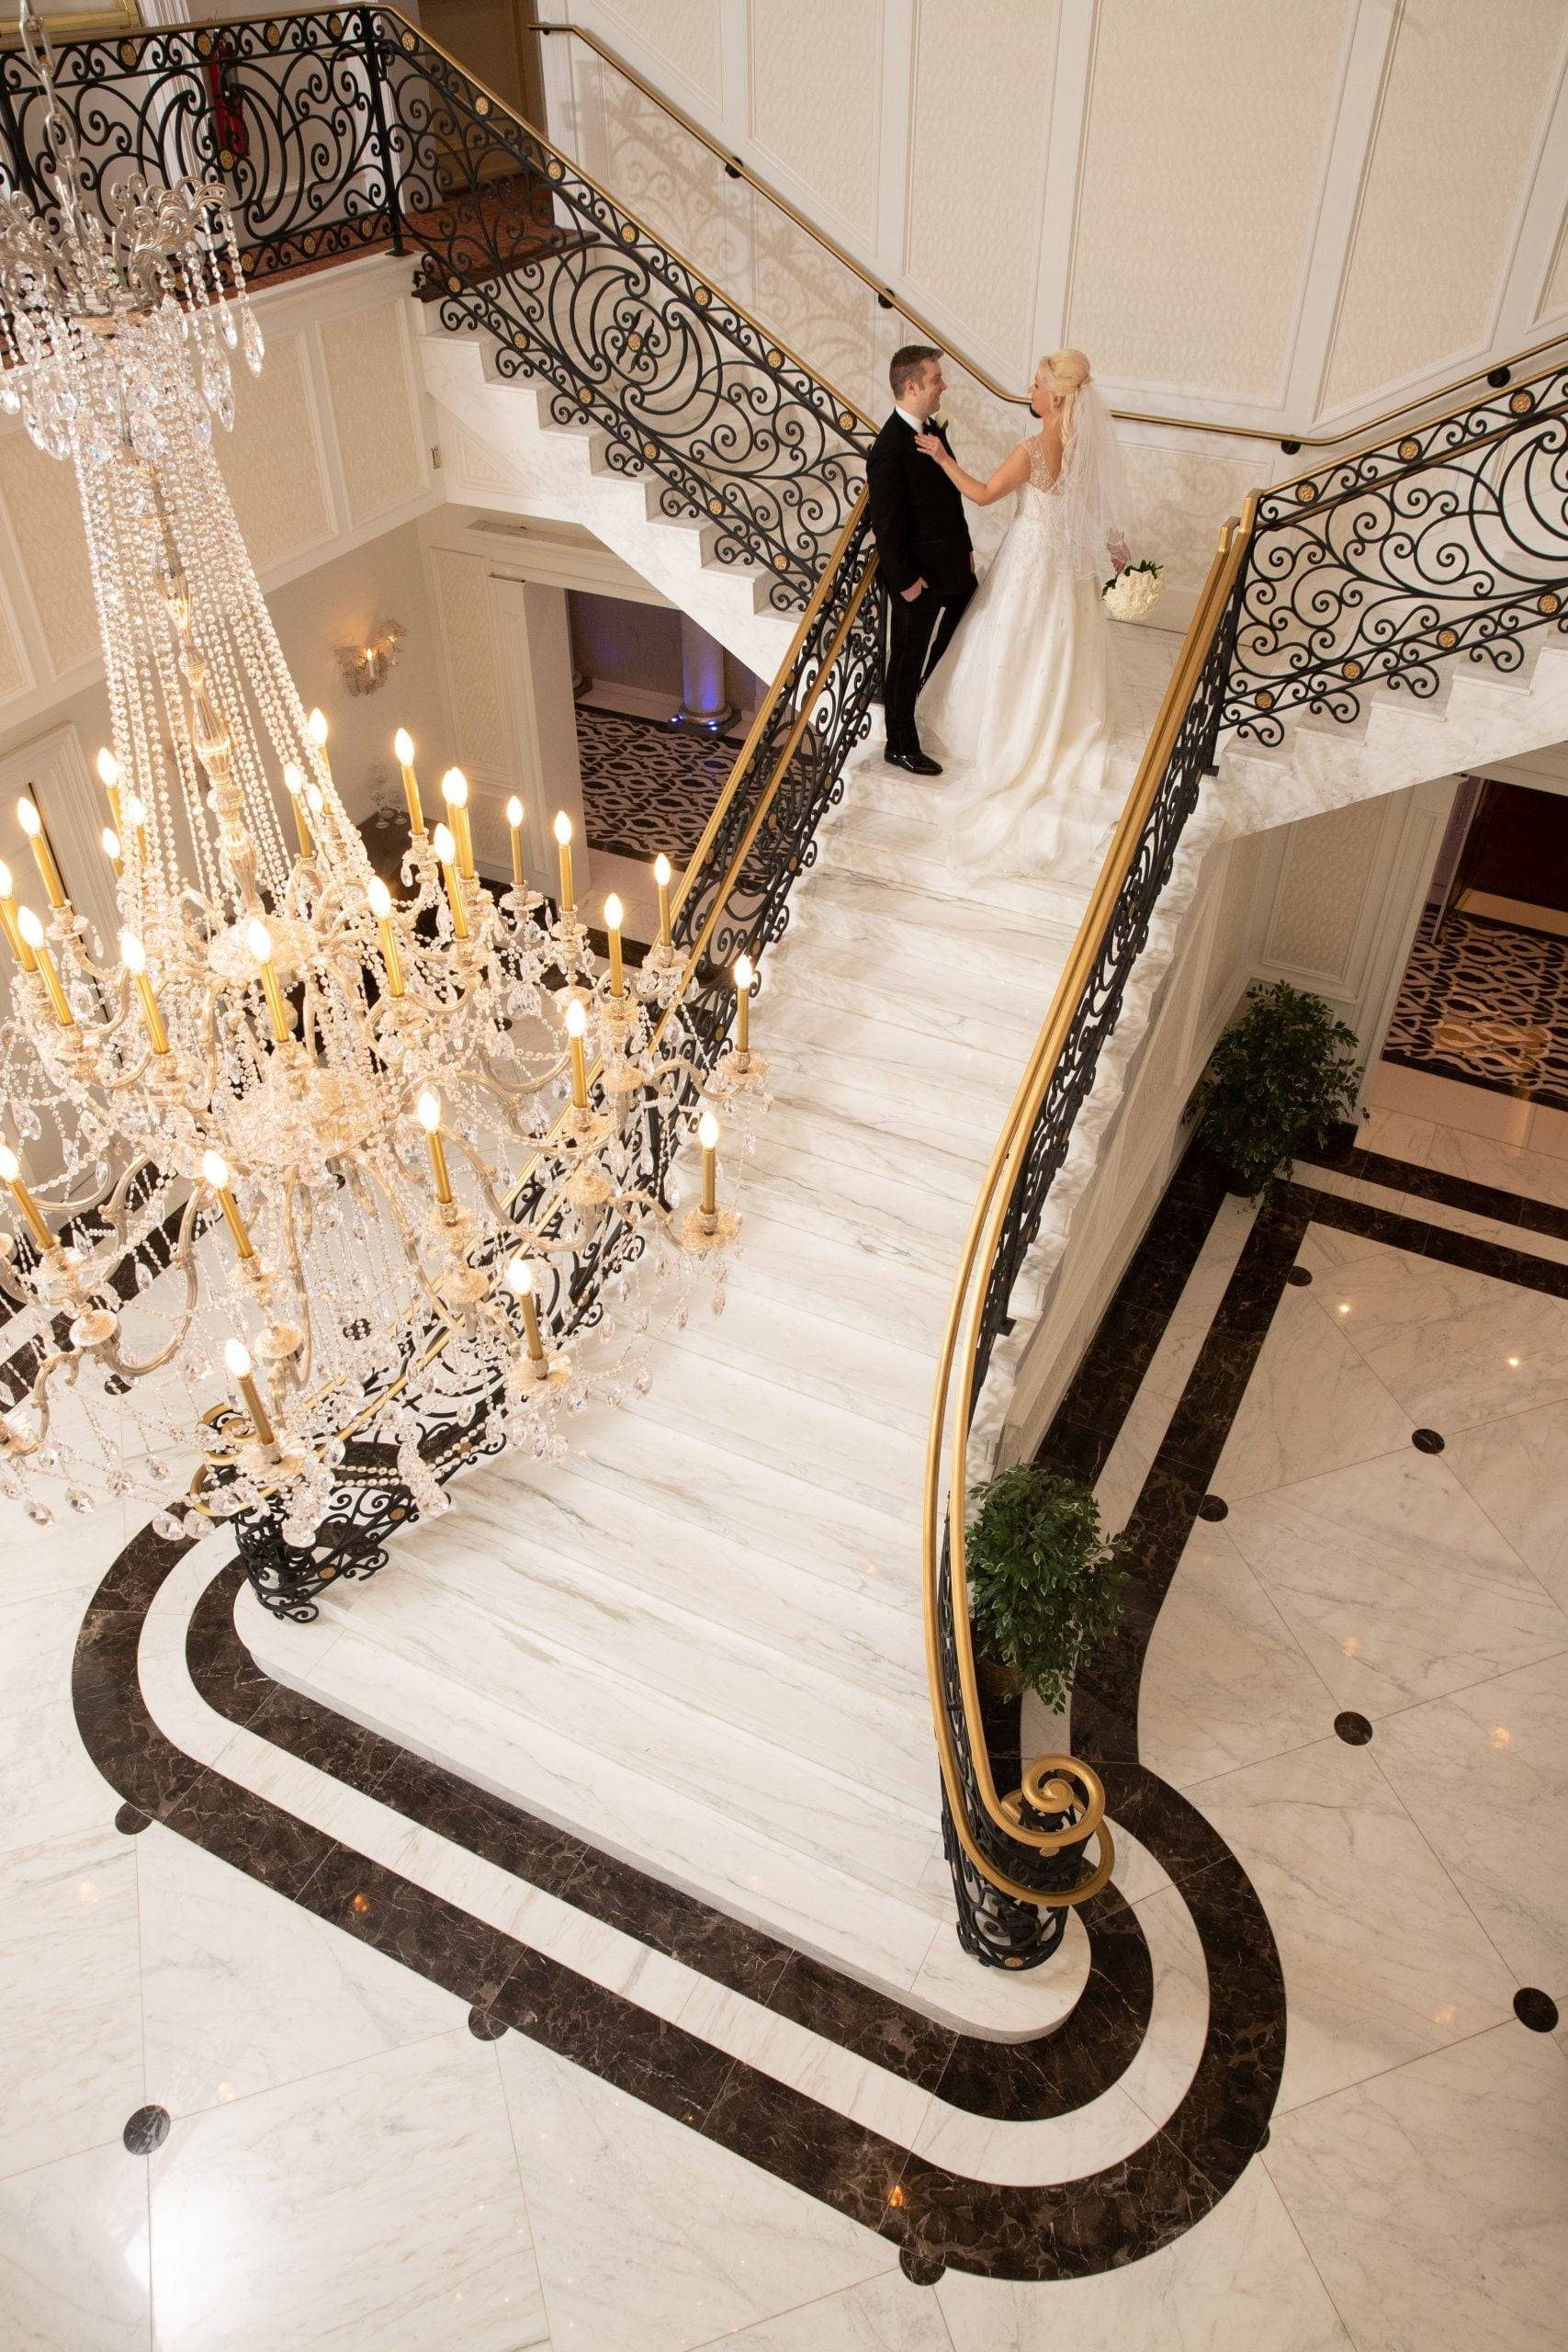 Meadow Wood bride and groom on staircase